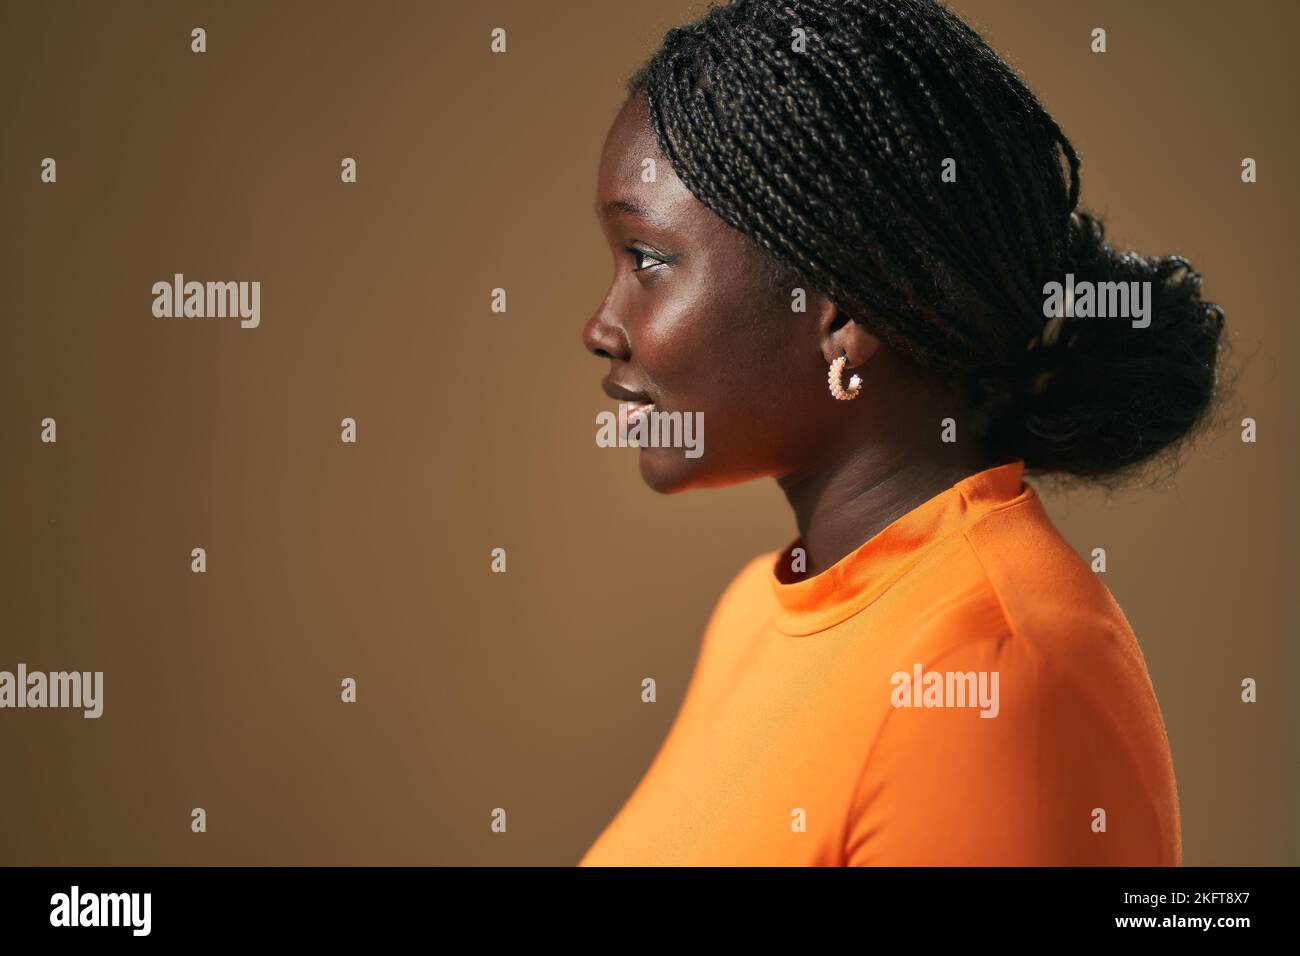 Side view portrait of smiling young African American female with Afro braids in orange top standing looking away on brown background in studio Stock Photo